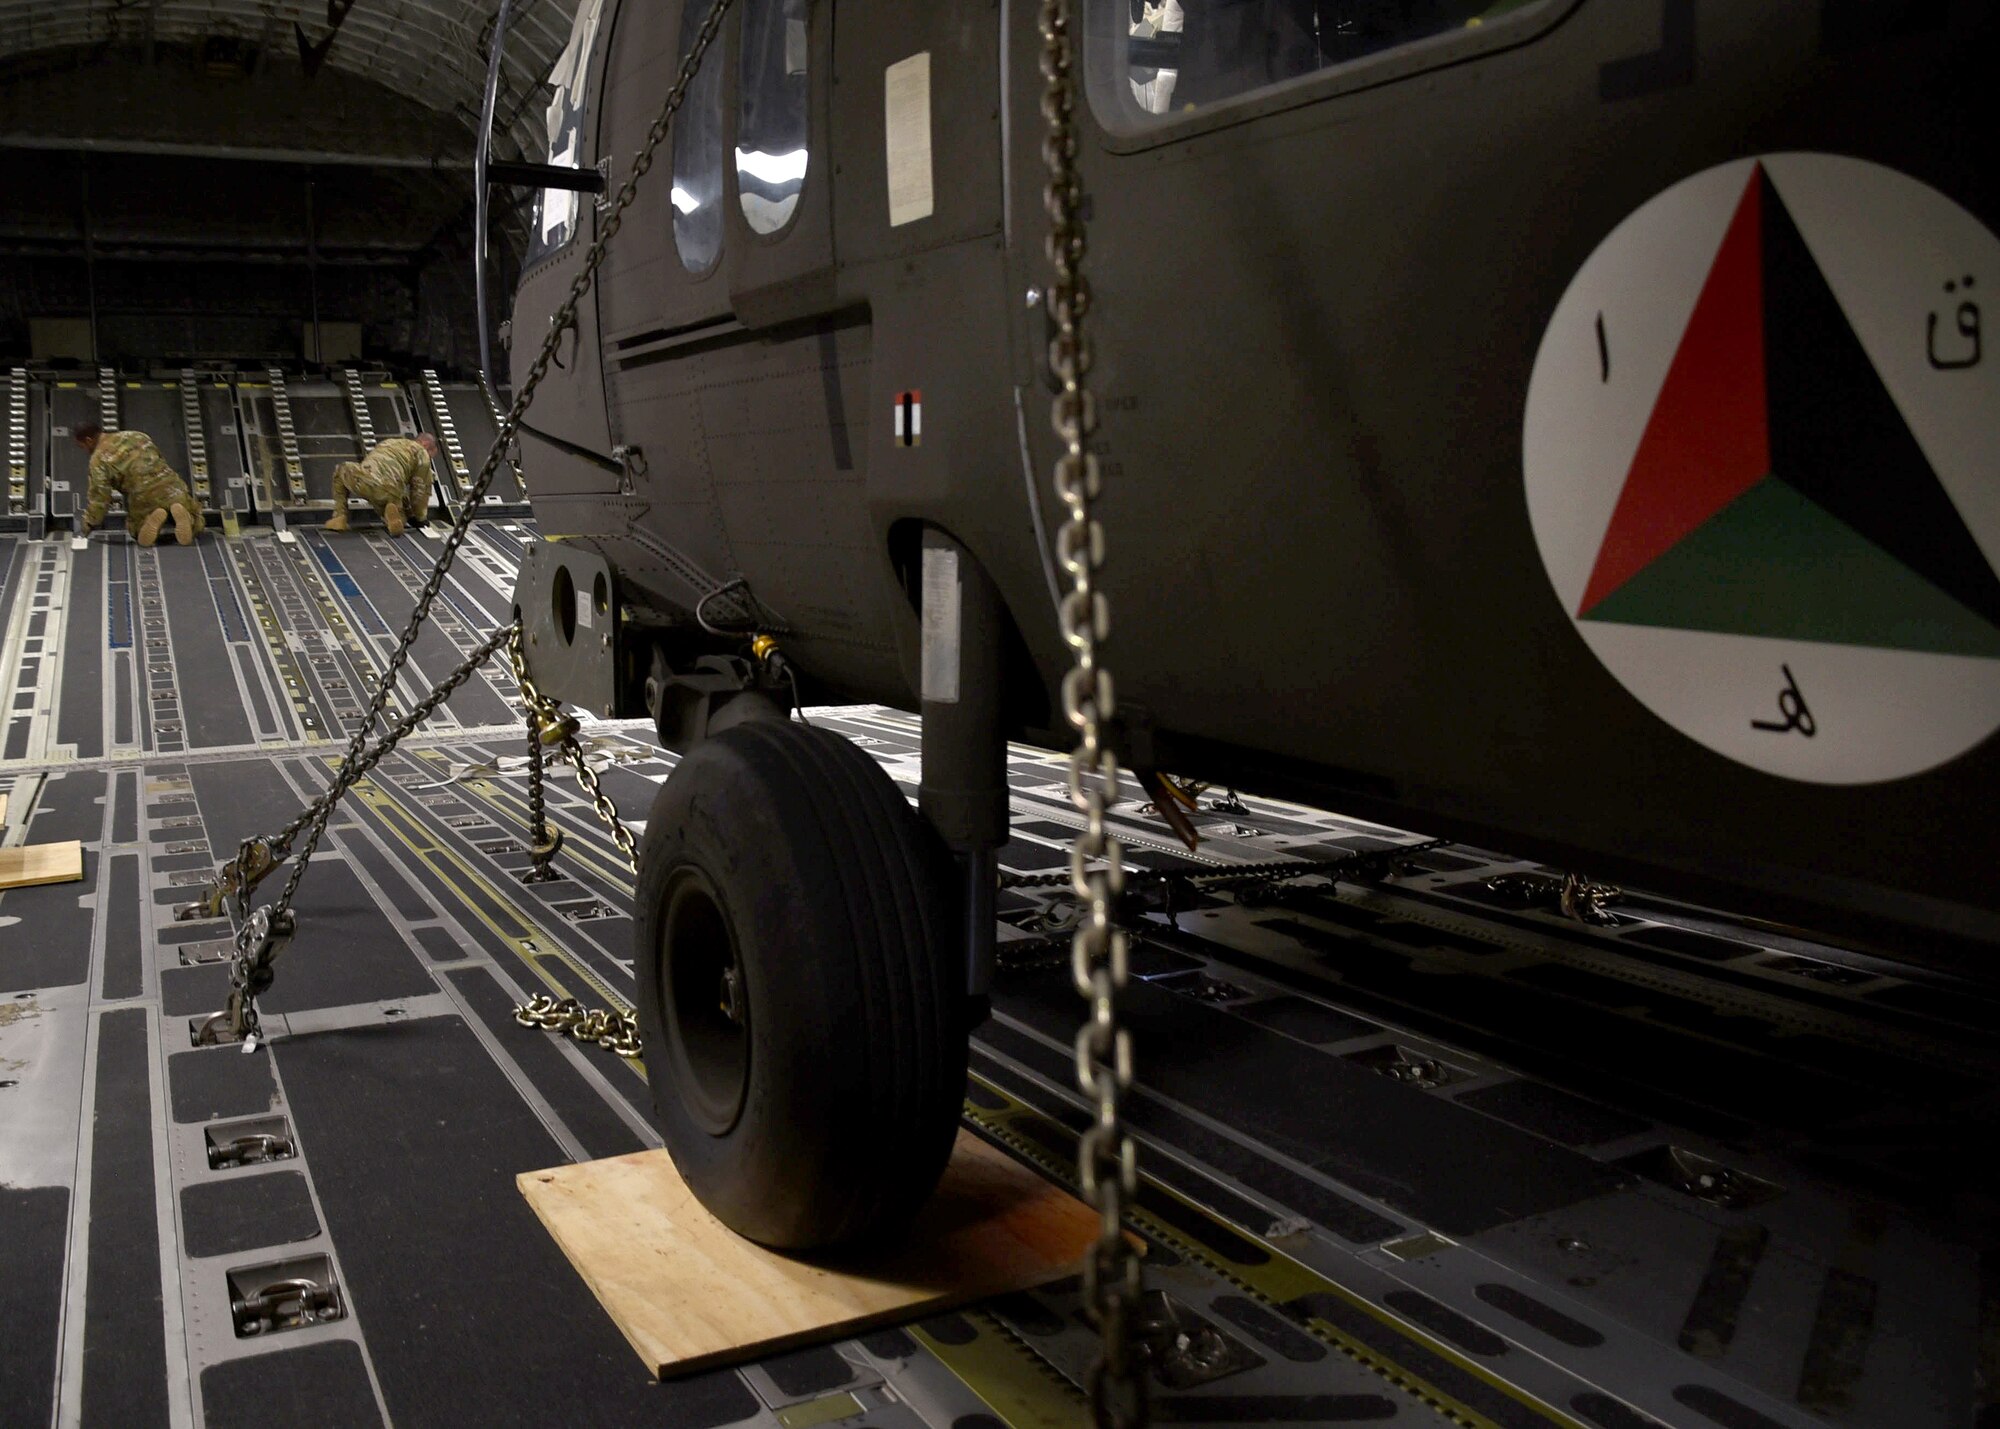 A U.S. Air Force C-17 loadmaster assigned to Charleston Air Force Base, S.C., prepares two Afghan Air Force UH-60 helicopters for unloading Sept. 18, 2017, at Kandahar Air Field, Afghanistan. These are the first UH-60s to be delivered to Afghanistan for the recapitalization of the AAF and development of a professional, capable and sustainable Afghan Air Force. (U.S. Air Force photo by Tech. Sgt. Veronica Pierce)